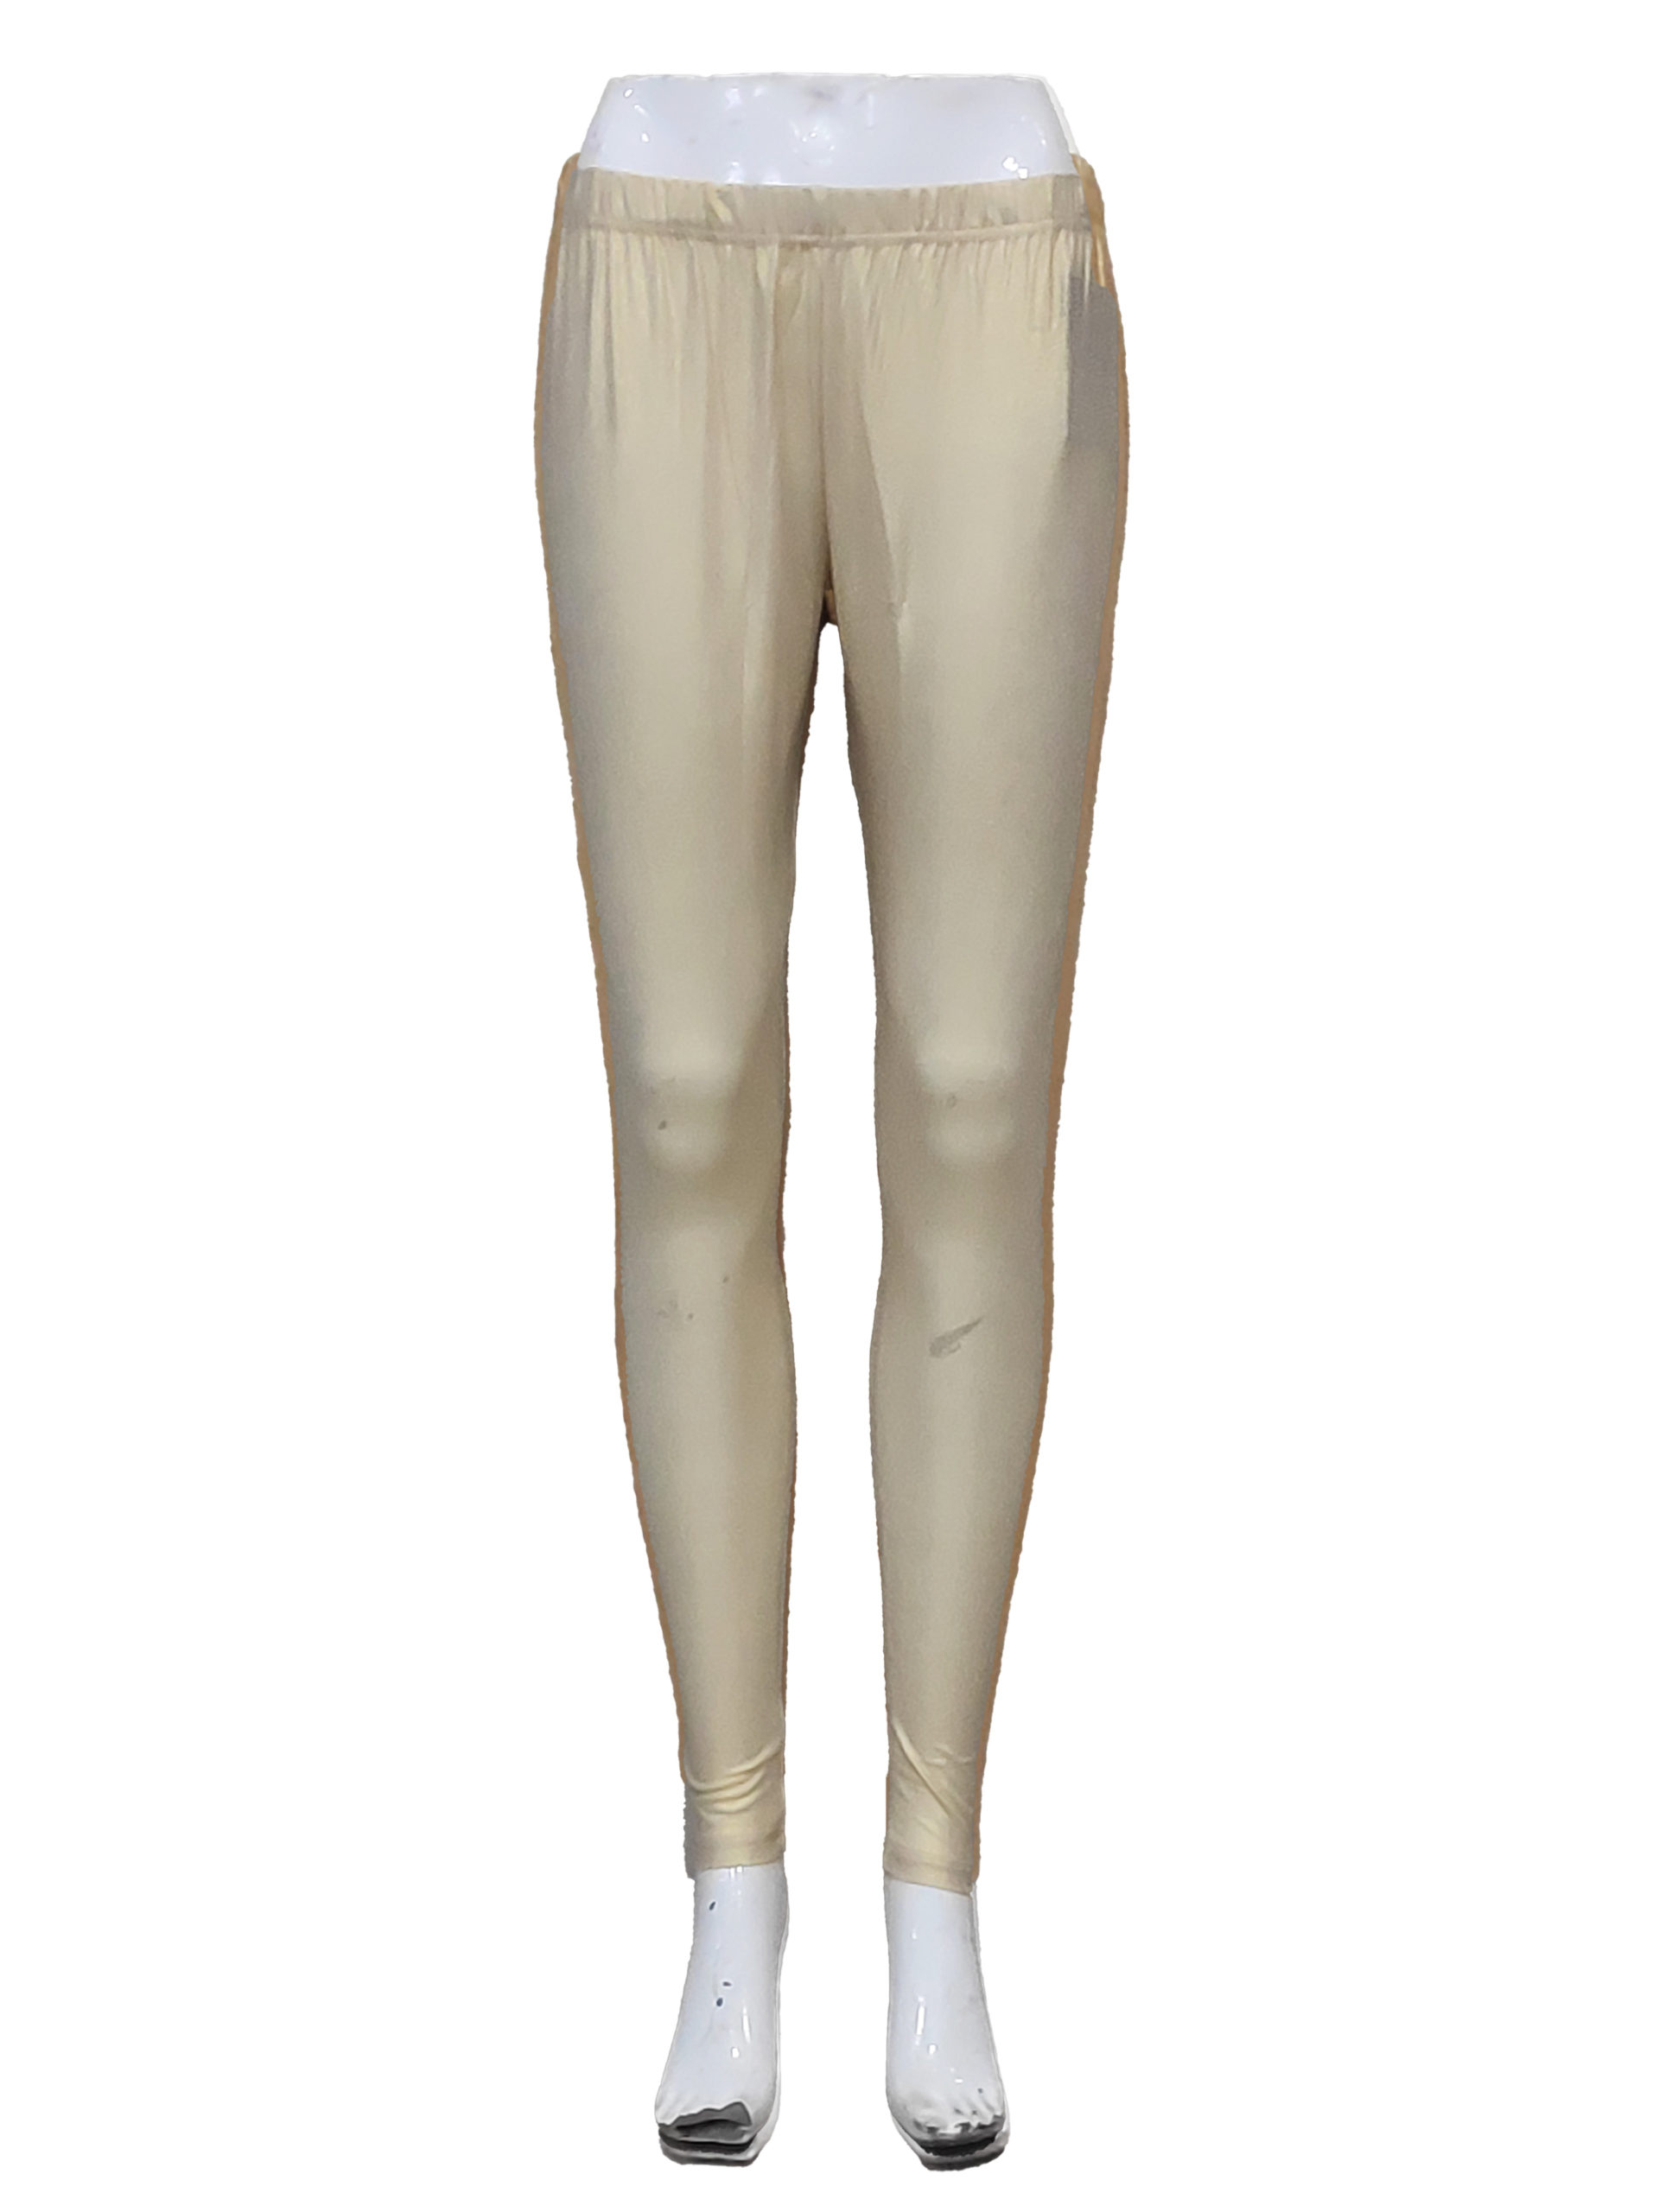 ruby style cotton black and golden colour leggings full size-thanhphatduhoc.com.vn